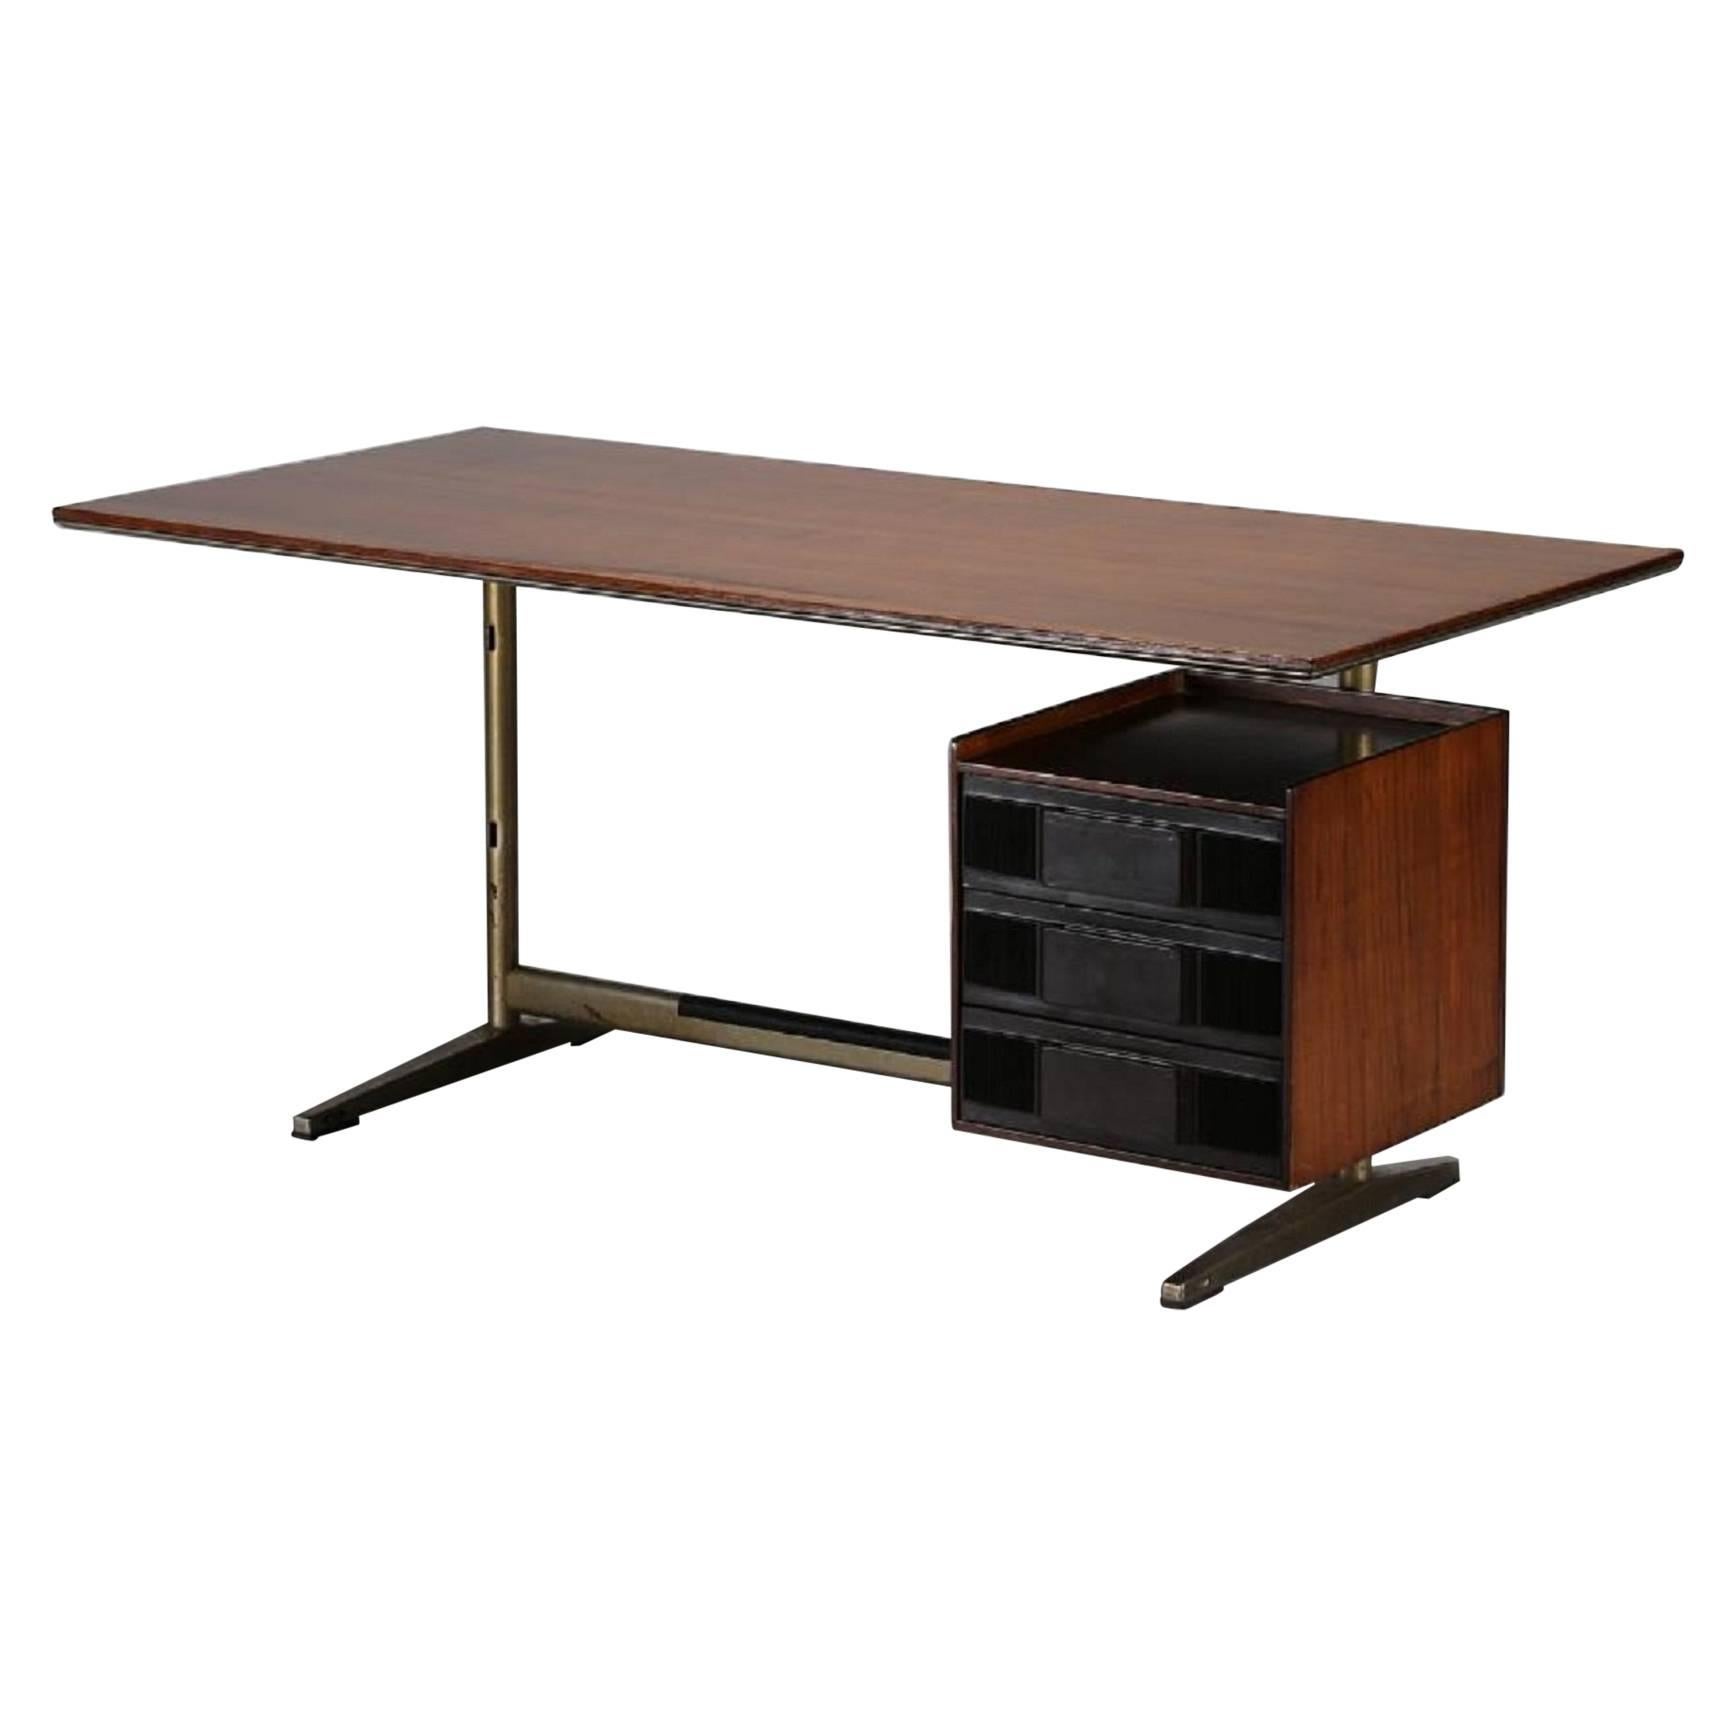 Gio Ponti Mahogamy Desk for Pirelly Tower Produced by Rima Padova Italy, 1961 For Sale